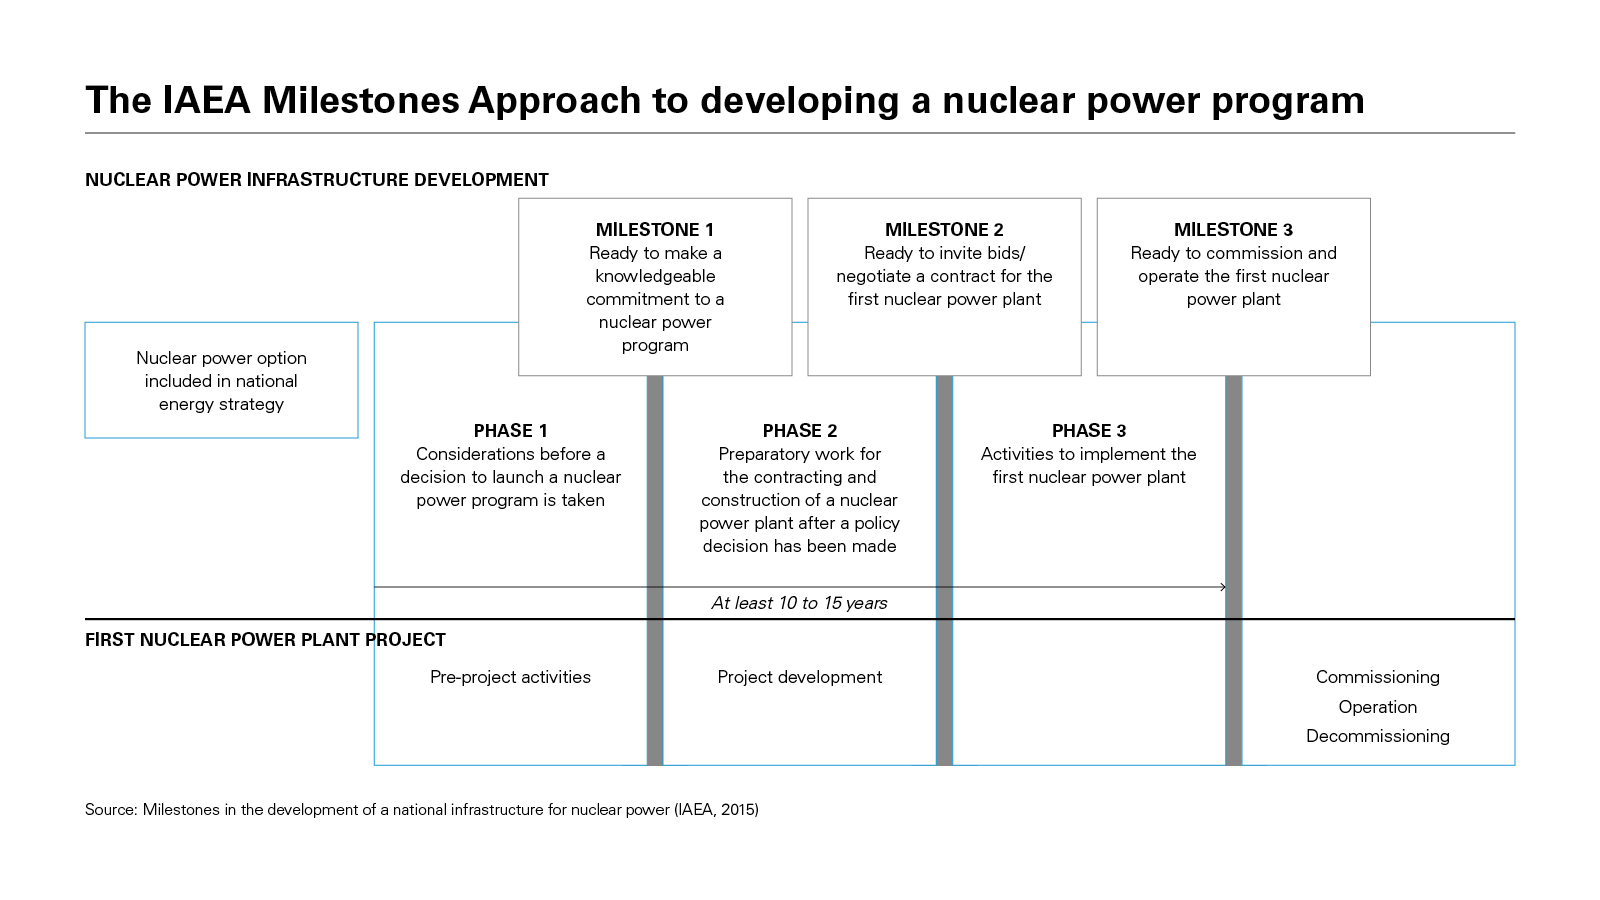 The IAEA Milestones Approach to developing a nuclear power program